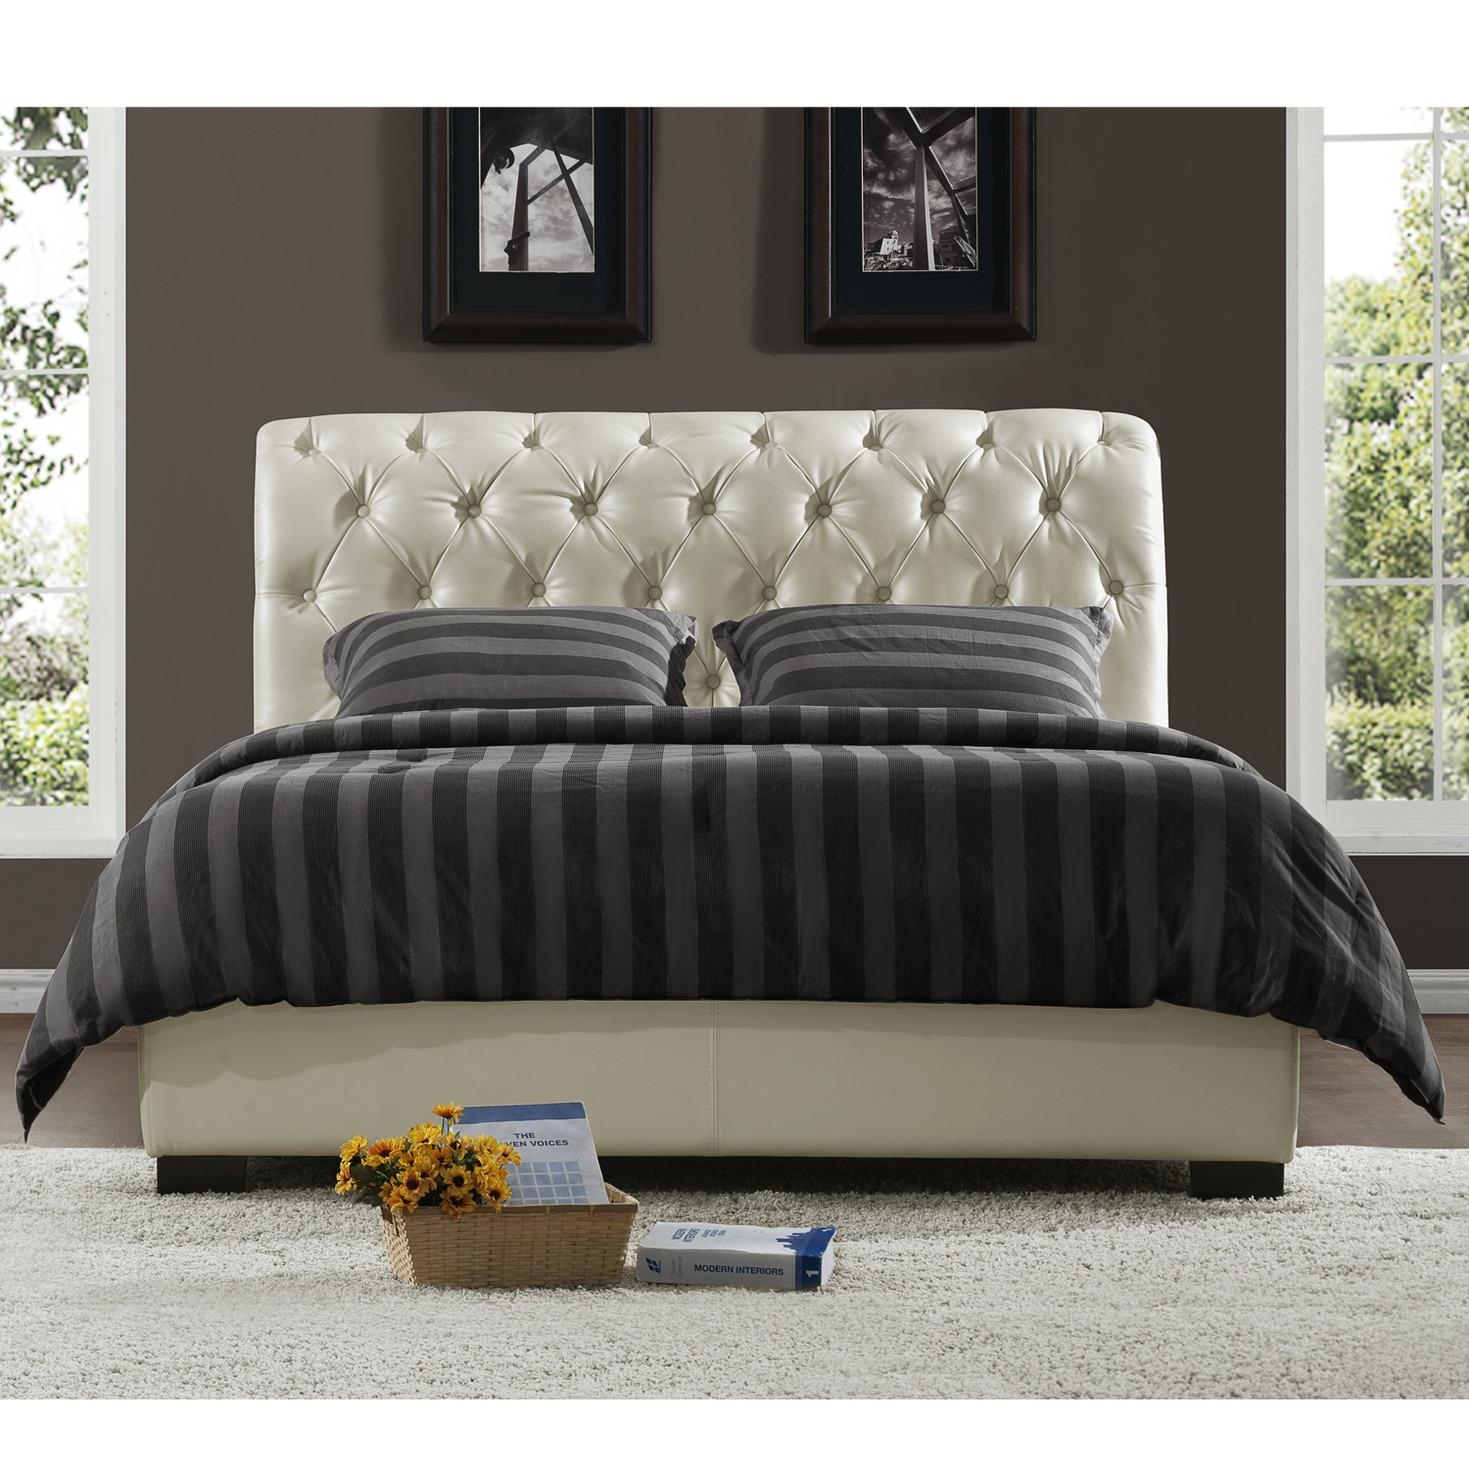 Castela soft white faux leather queen bed